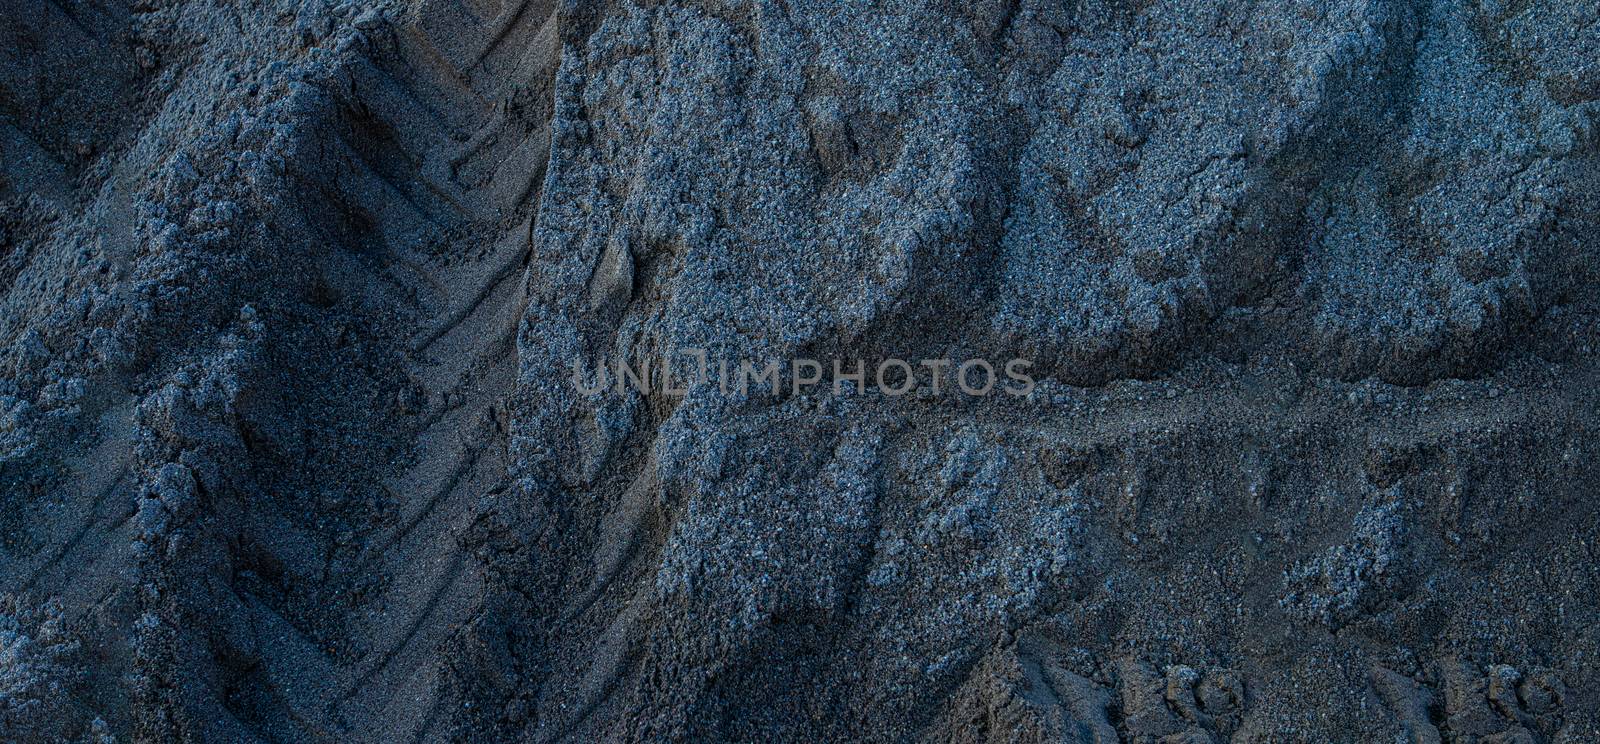 grey sand shot from above with tire marks by PeterHofstetter